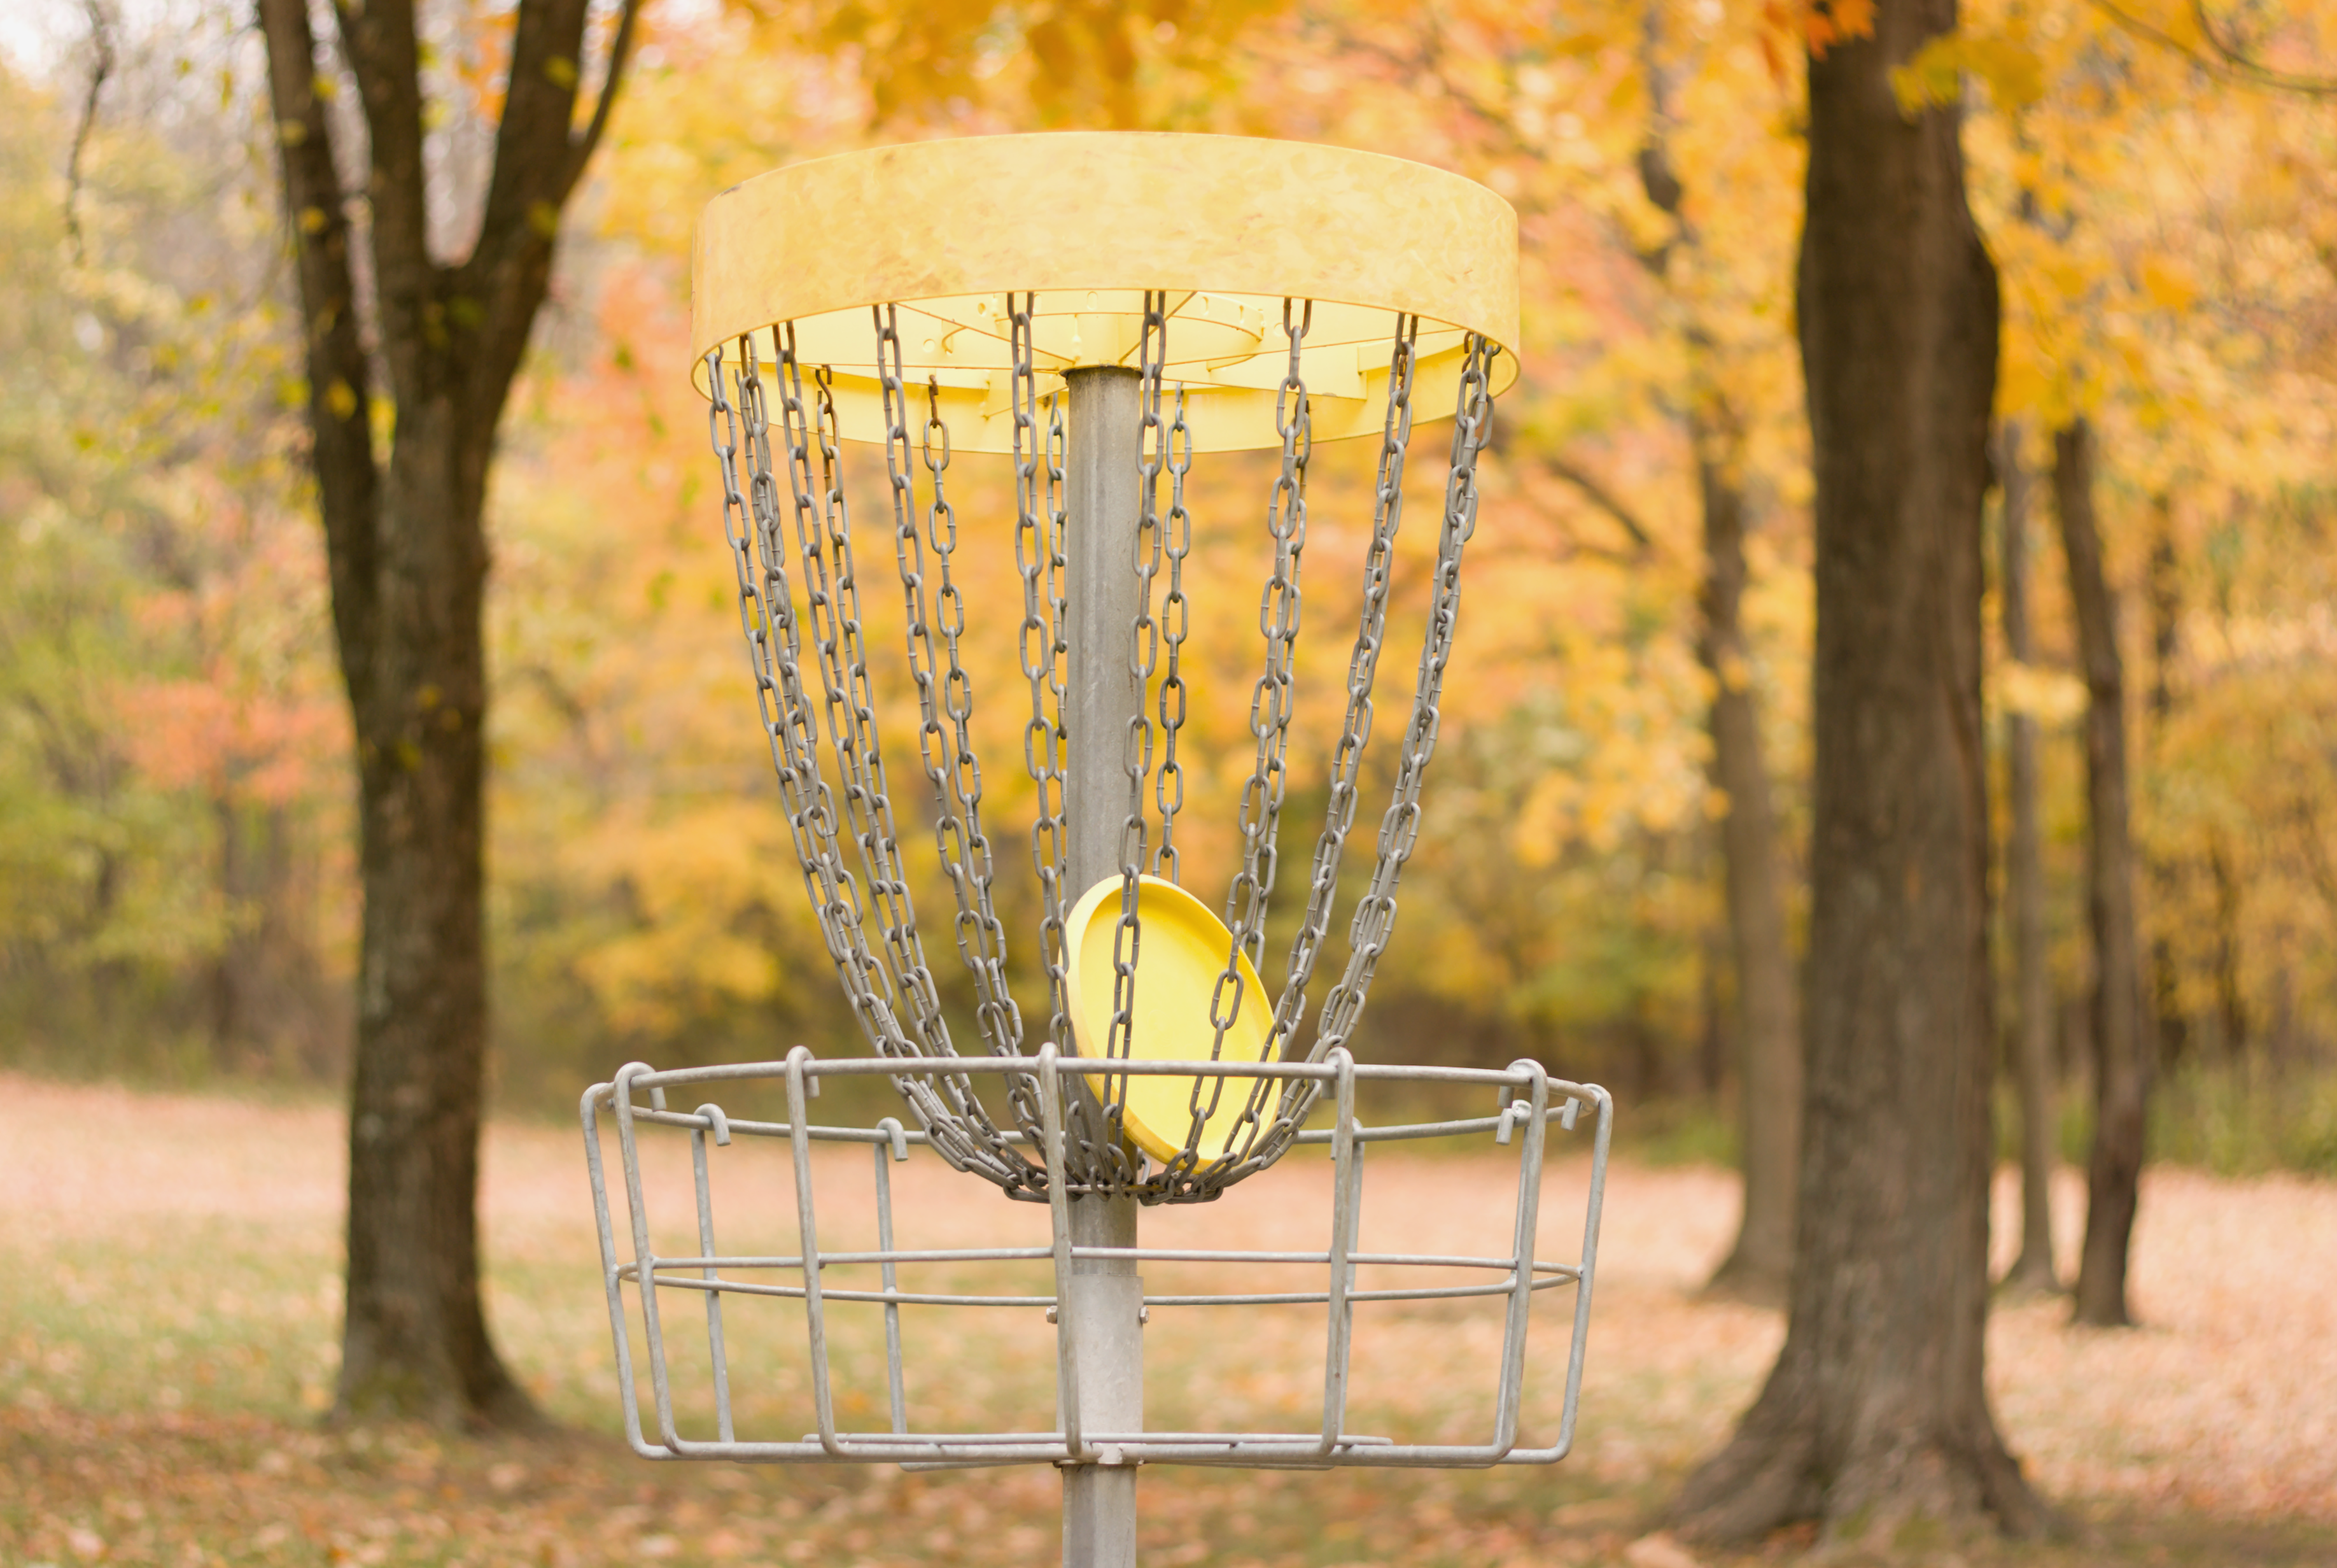 Jarvis Lions Park named site of new 9-hole disc golf course